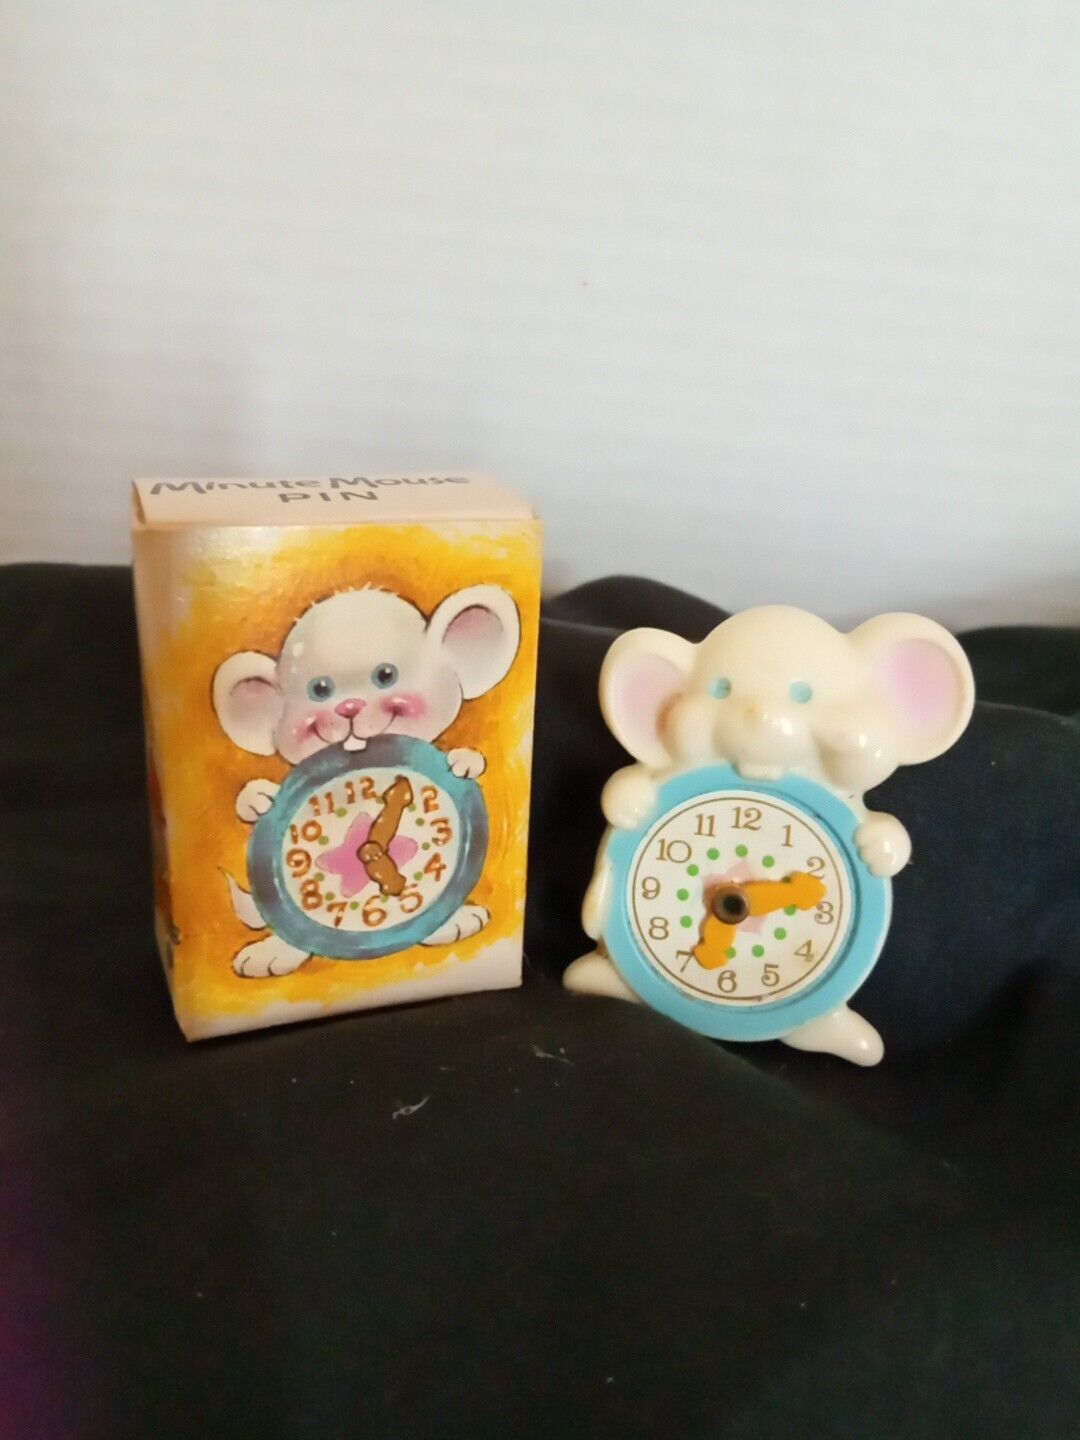 Vintage NOS 1970s Avon Minute Mouse Pin Brooch in Box Children Jewelry